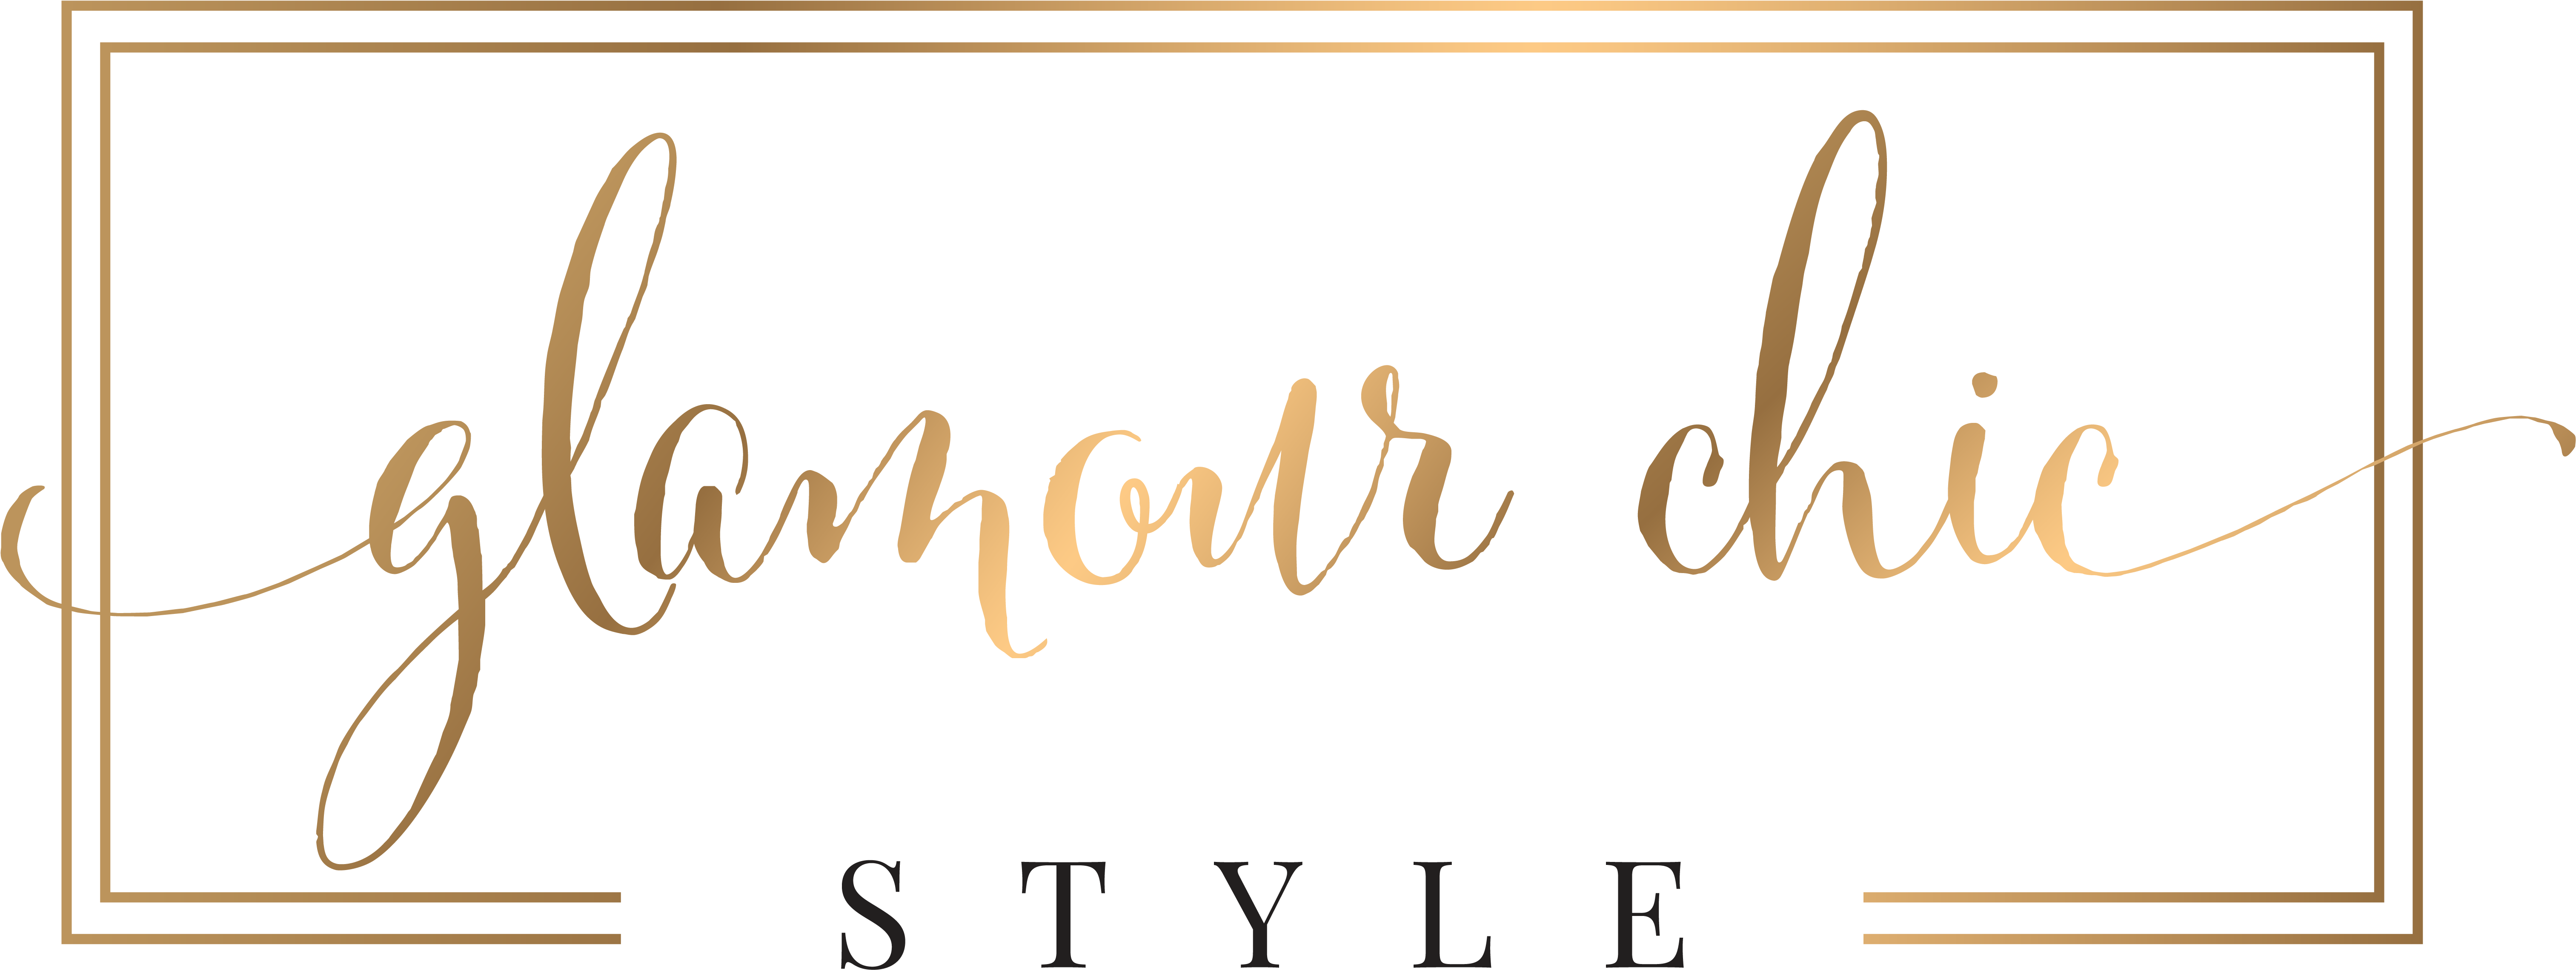 Home - Glamour Style Logo Clipart - Large Size Png Image - PikPng